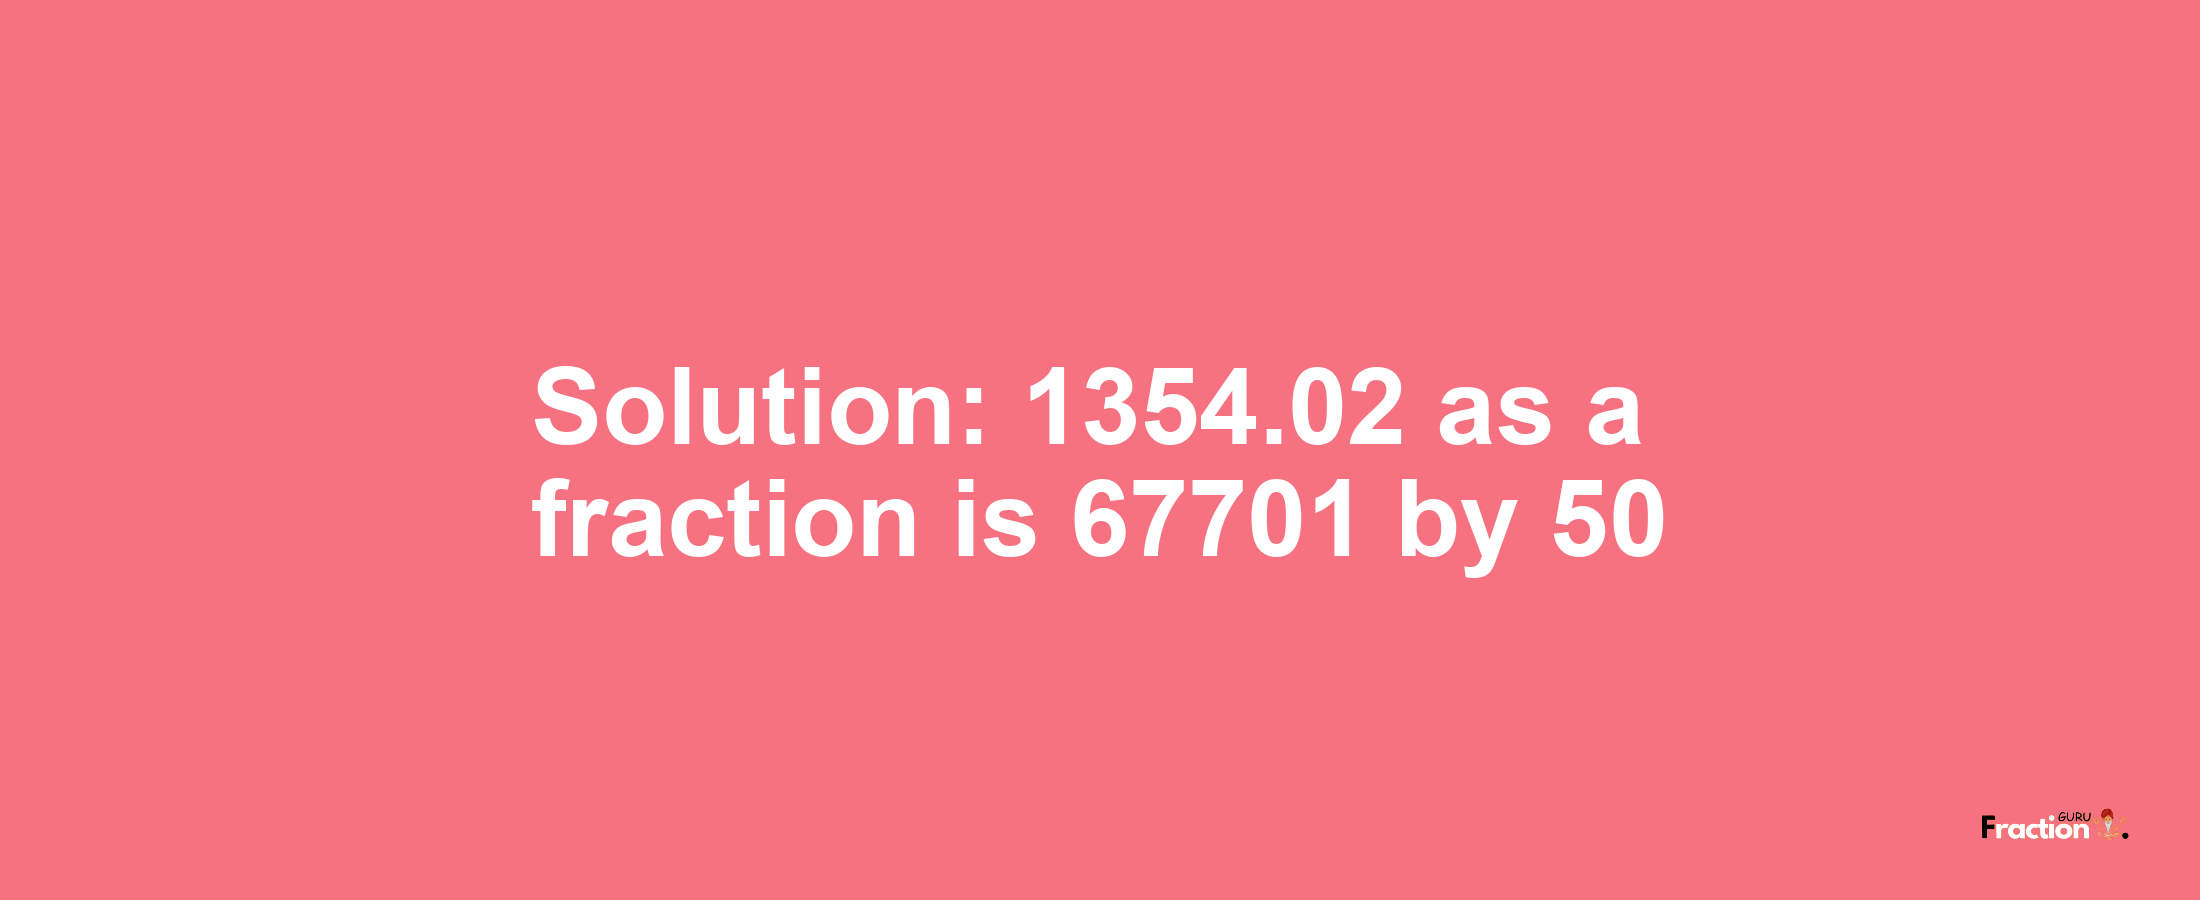 Solution:1354.02 as a fraction is 67701/50